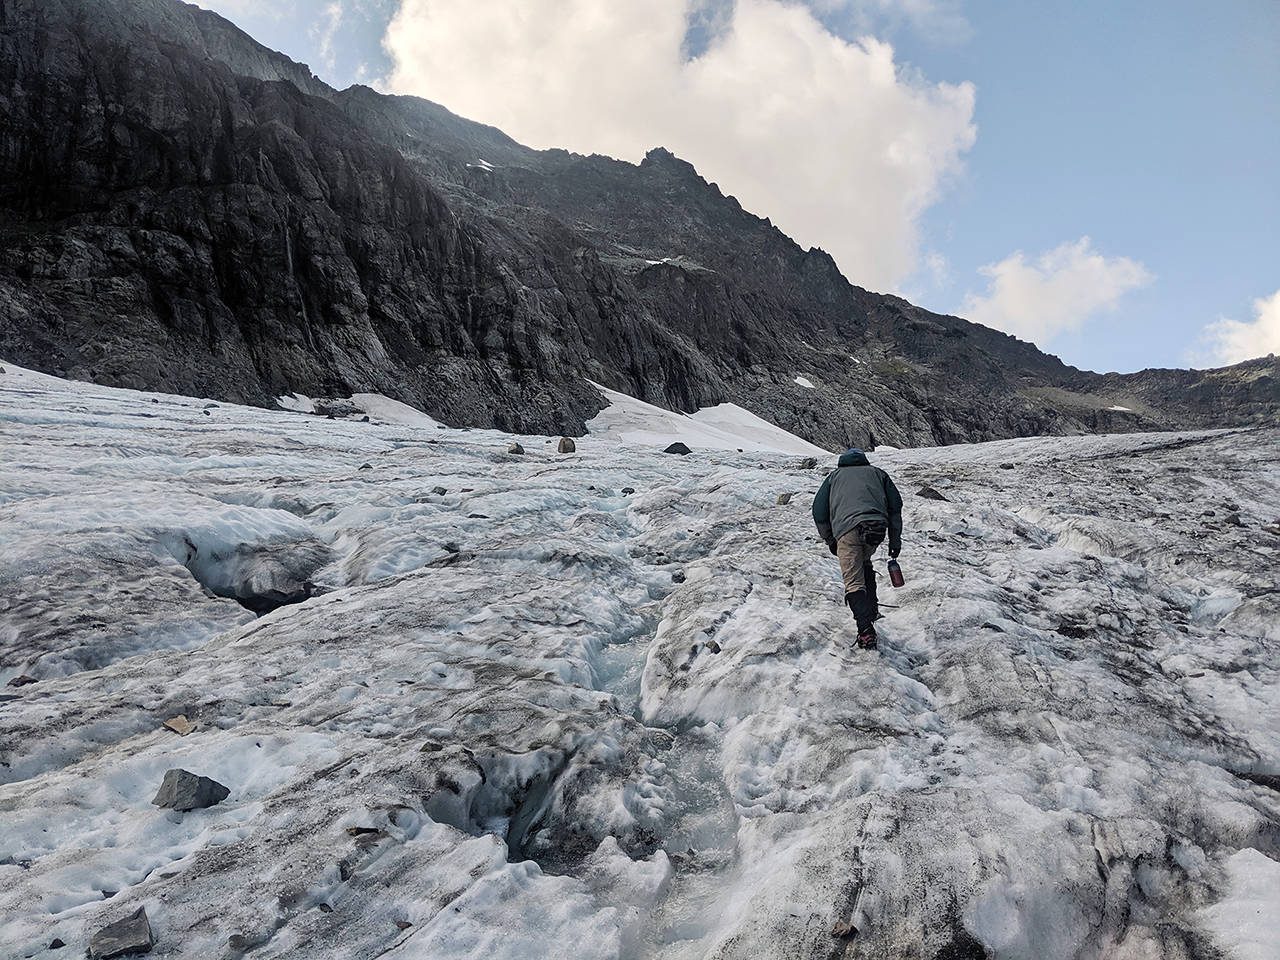 <strong></strong>With crampons strapped on and ice ax in hand, glaciologist Mauri Pelto makes his way up Columbia Glacier. (Zachariah Bryan / The Herald)